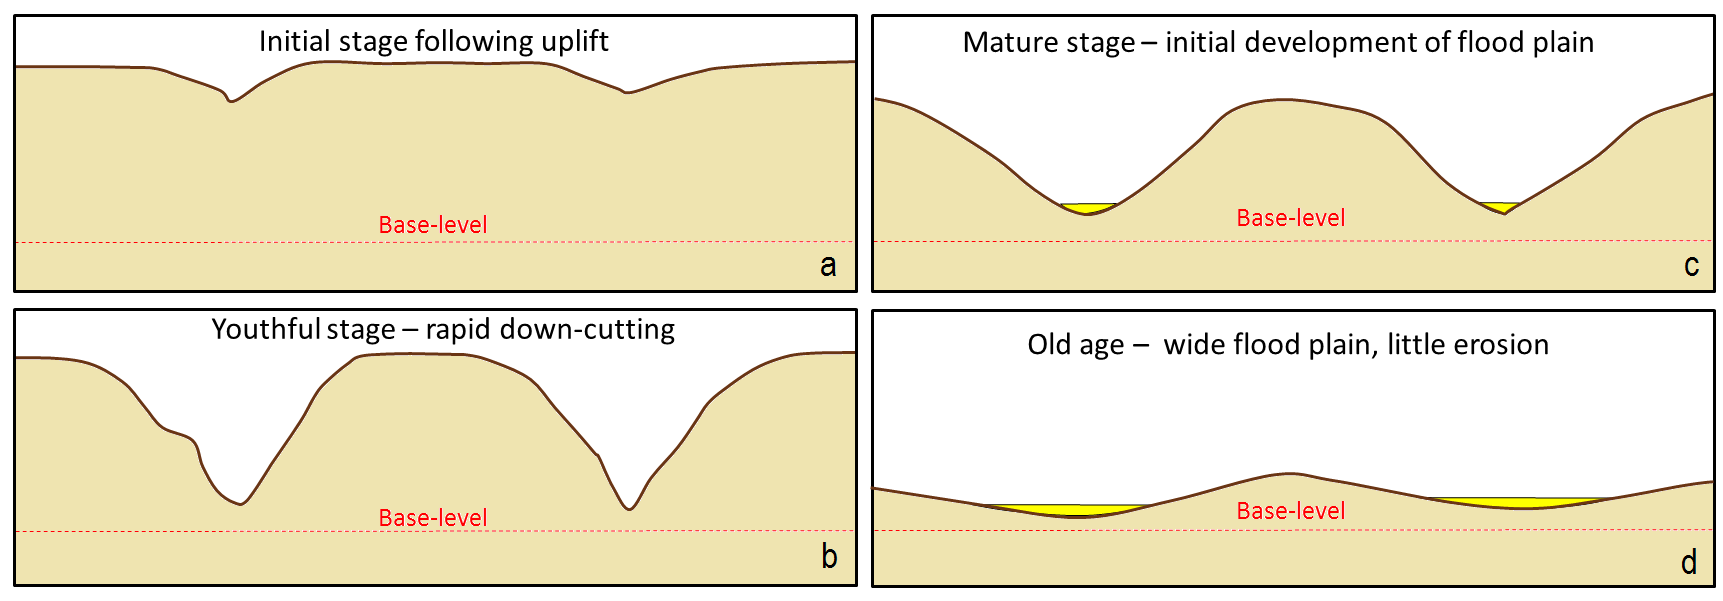 A depiction of the Davis cycle of erosion: a: initial stage, b: youthful stage, c: mature stage, and d: old age . Source: Steven Earle (2015) CC BY 4.0 [view source](https://opentextbc.ca/geology/wp-content/uploads/sites/110/2015/08/Davis-cycle-of-erosion.png)